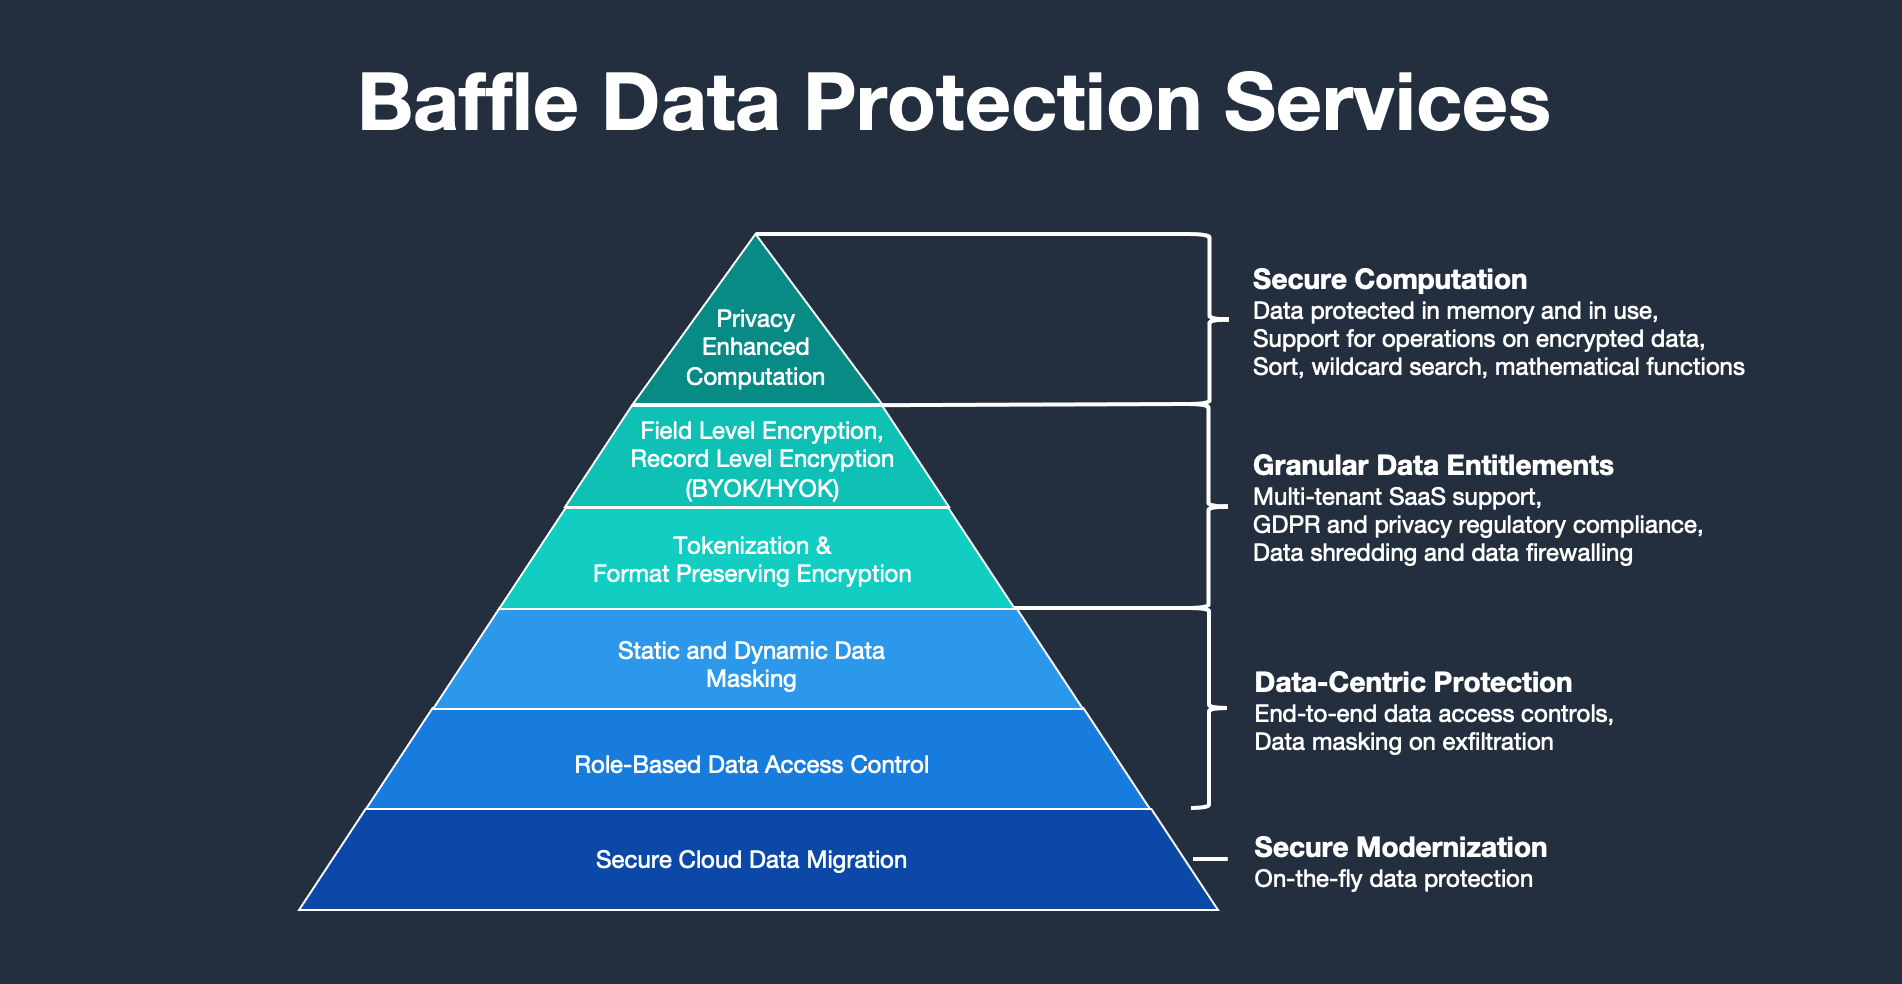 Baffle Data Protection Services